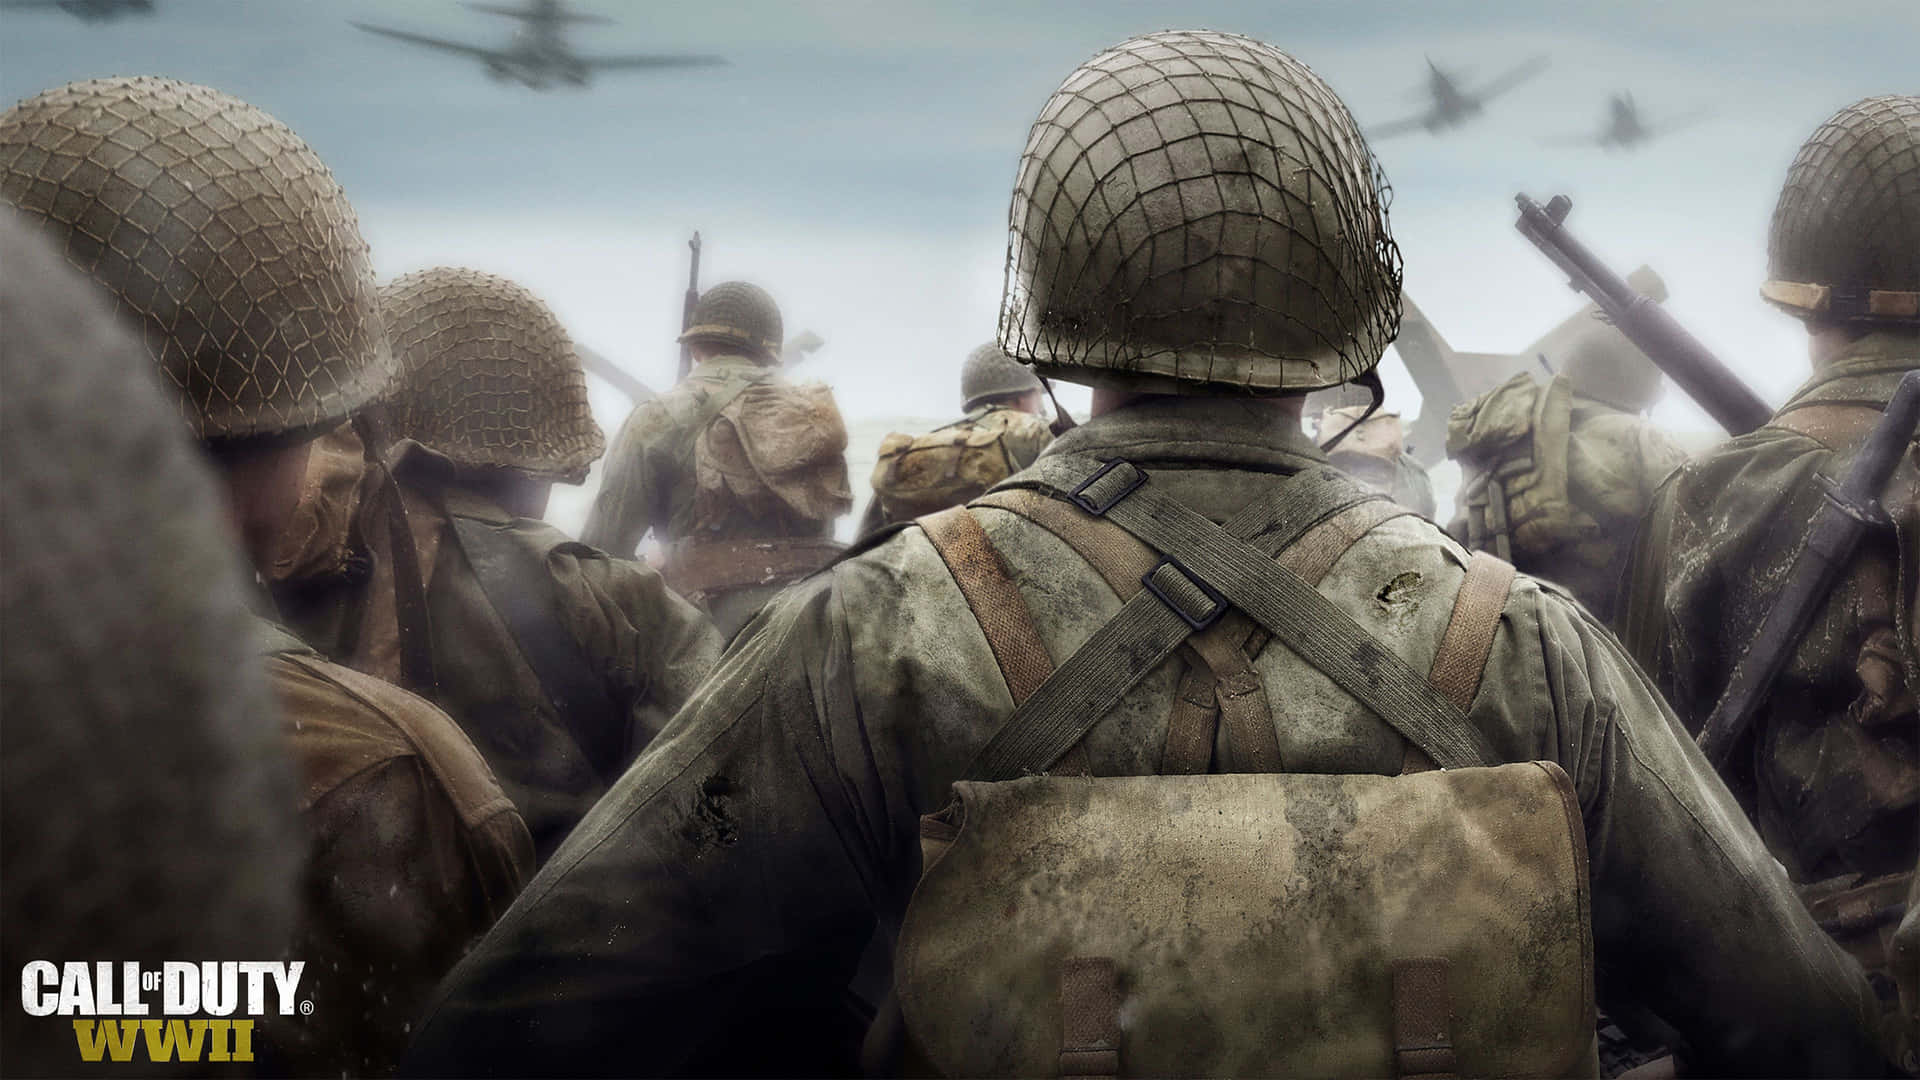 Protagonists of Call of Duty in action Wallpaper